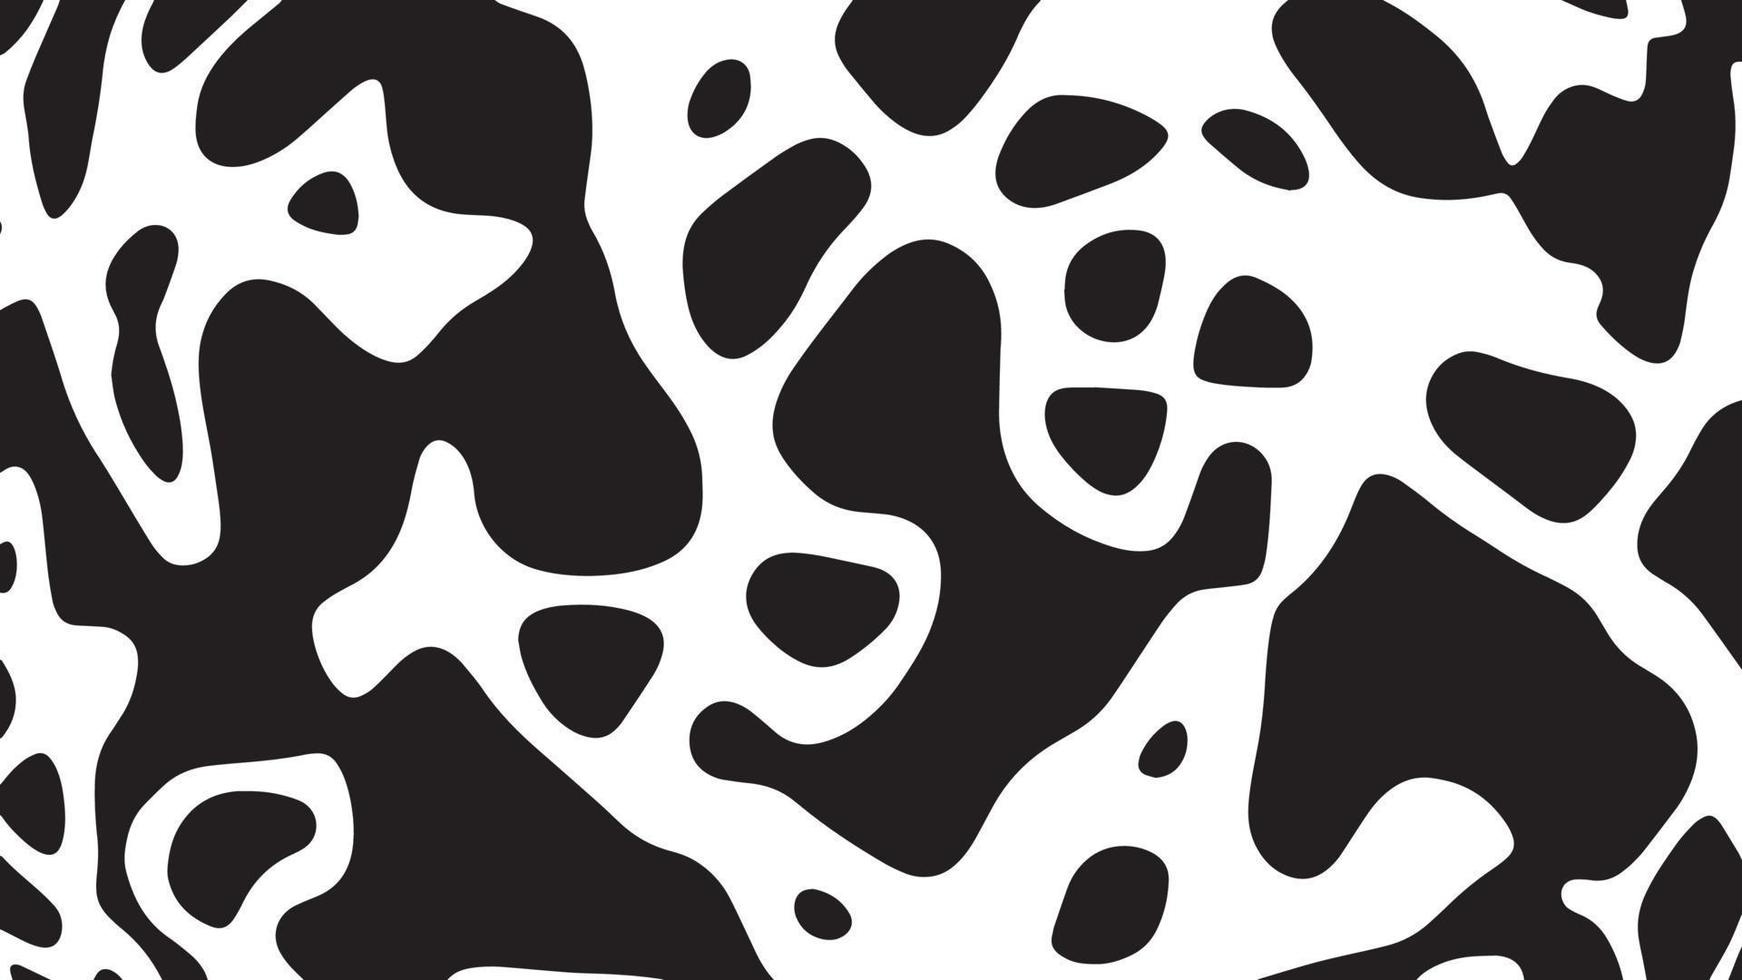 Black and white cow pattern animal skin texture vector